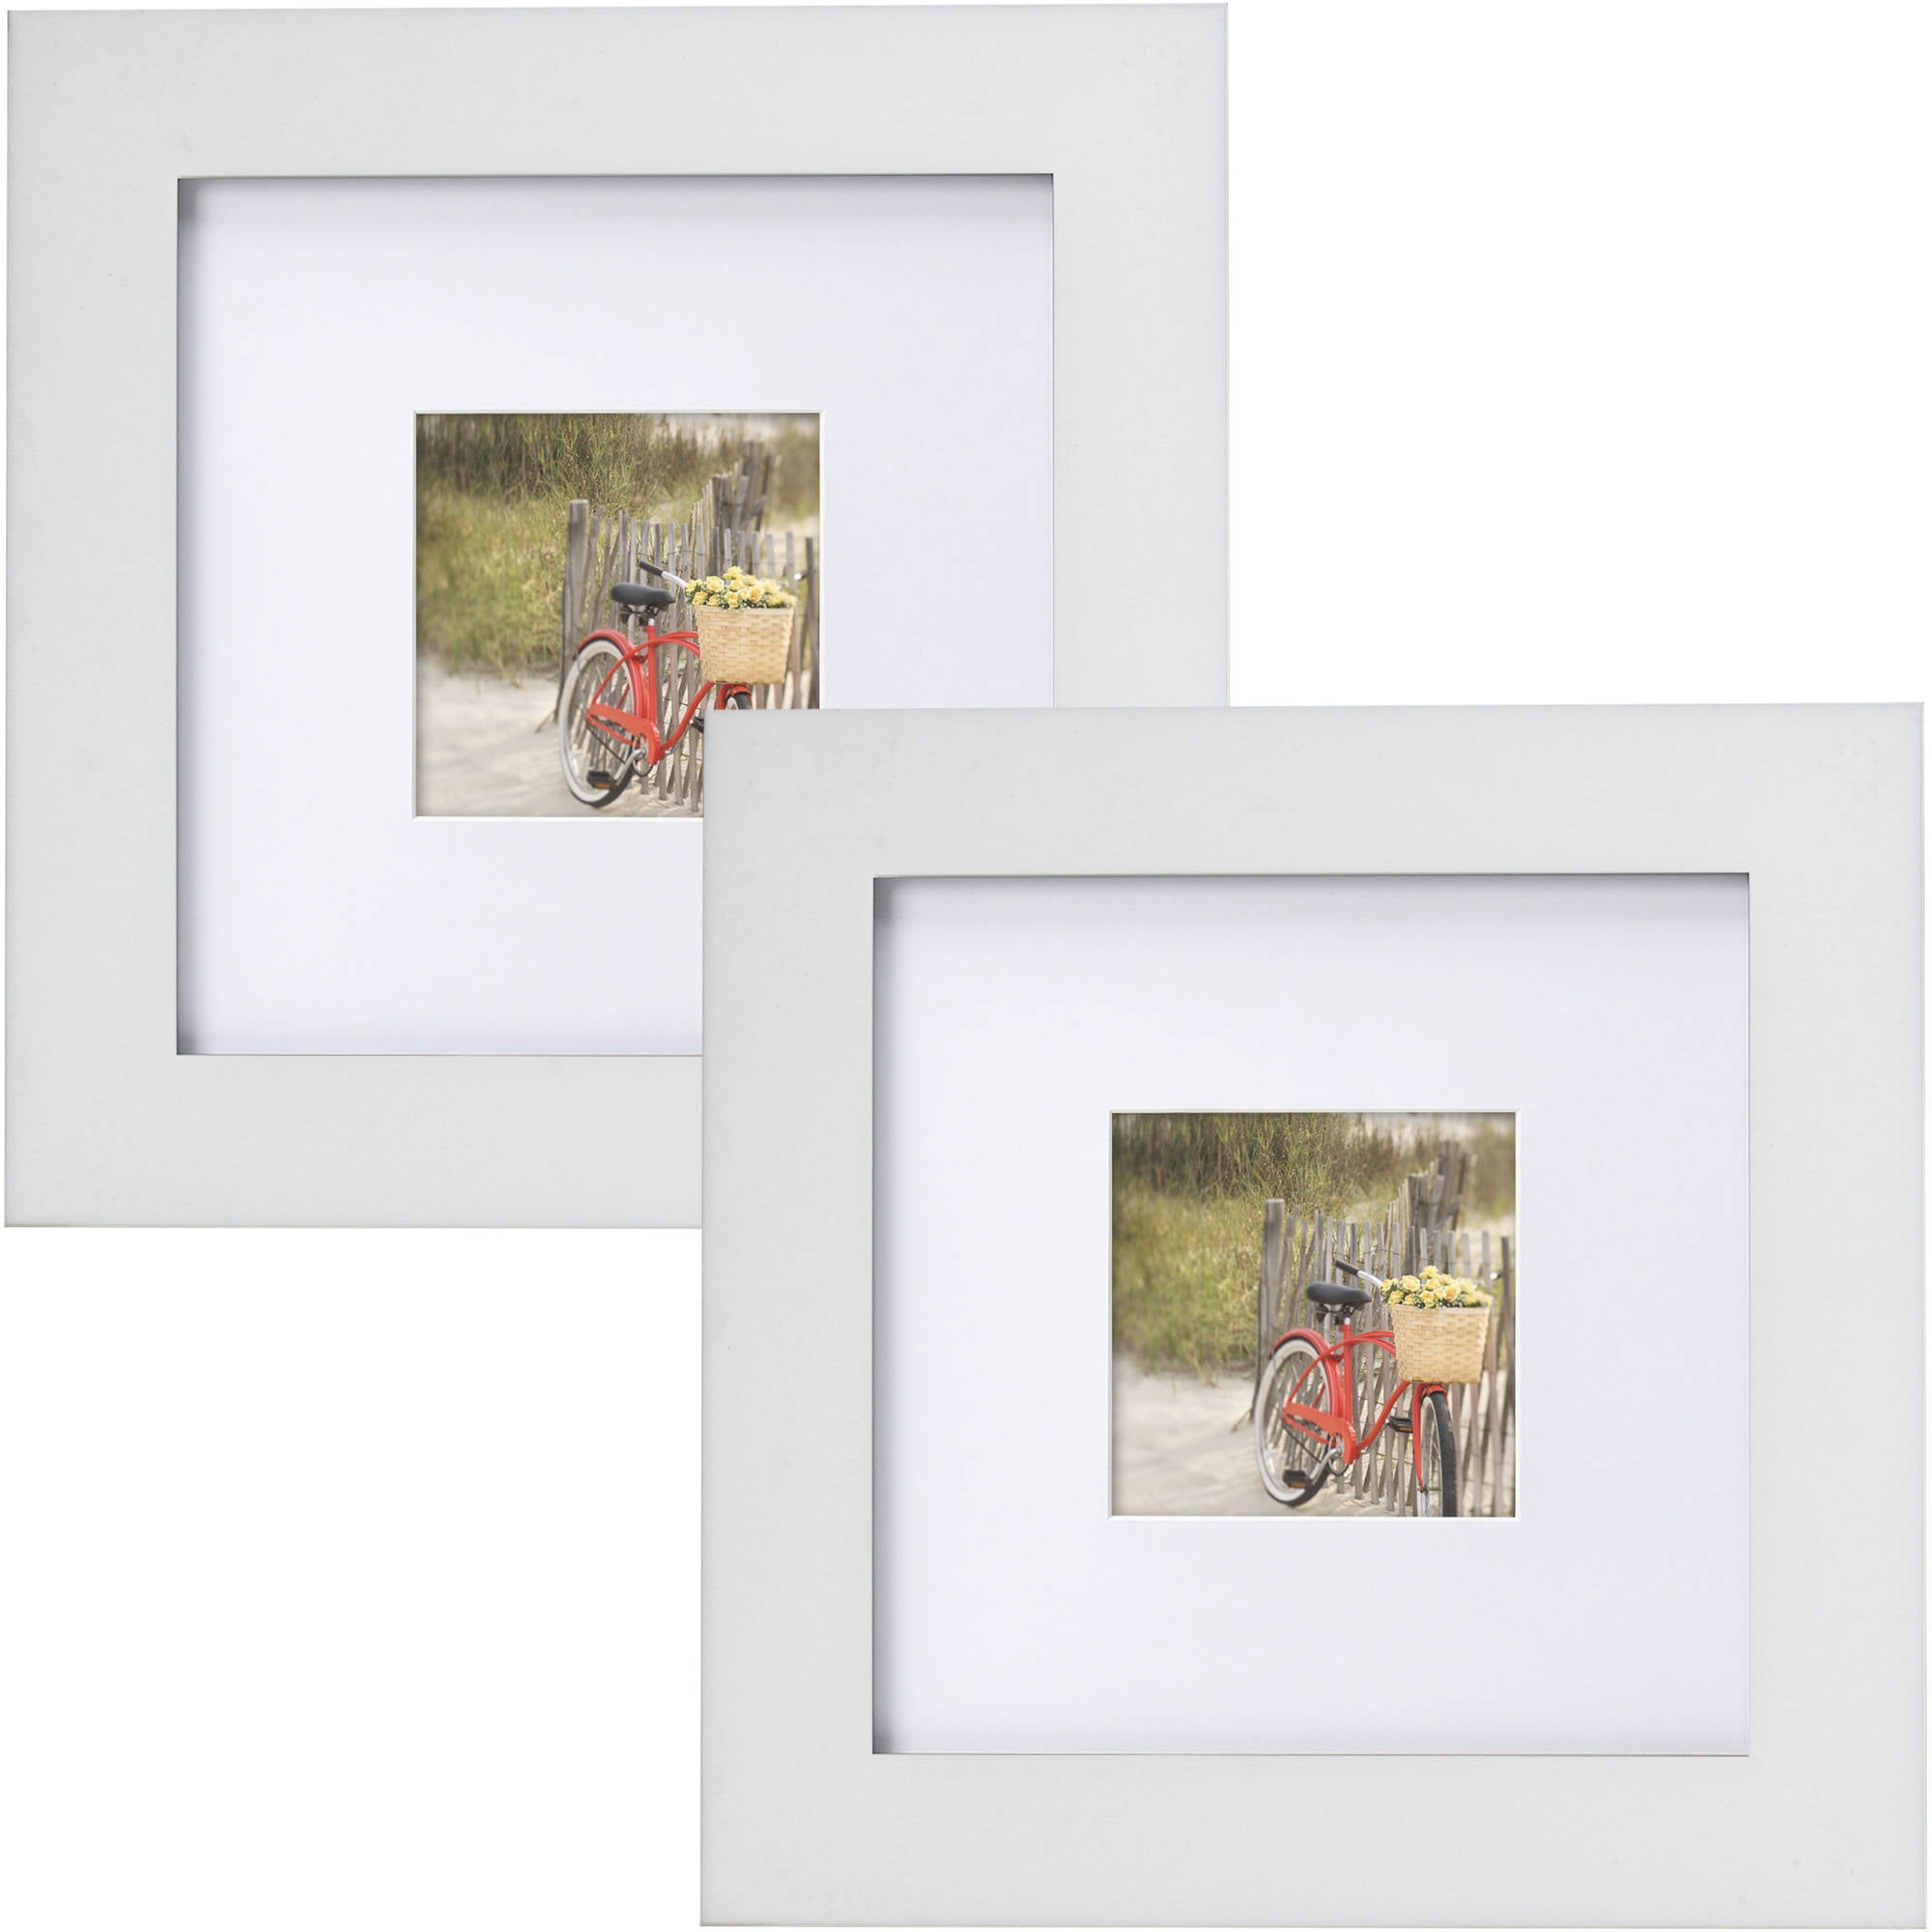 HAUS AND HUES Solid Oak 8x8 Picture Frame Matted to 4x4 - 8x8 Square  White Picture Frames, Square Picture Frame Wood, 8 x 8 Picture Frames with  Mat, White Poster Frames with